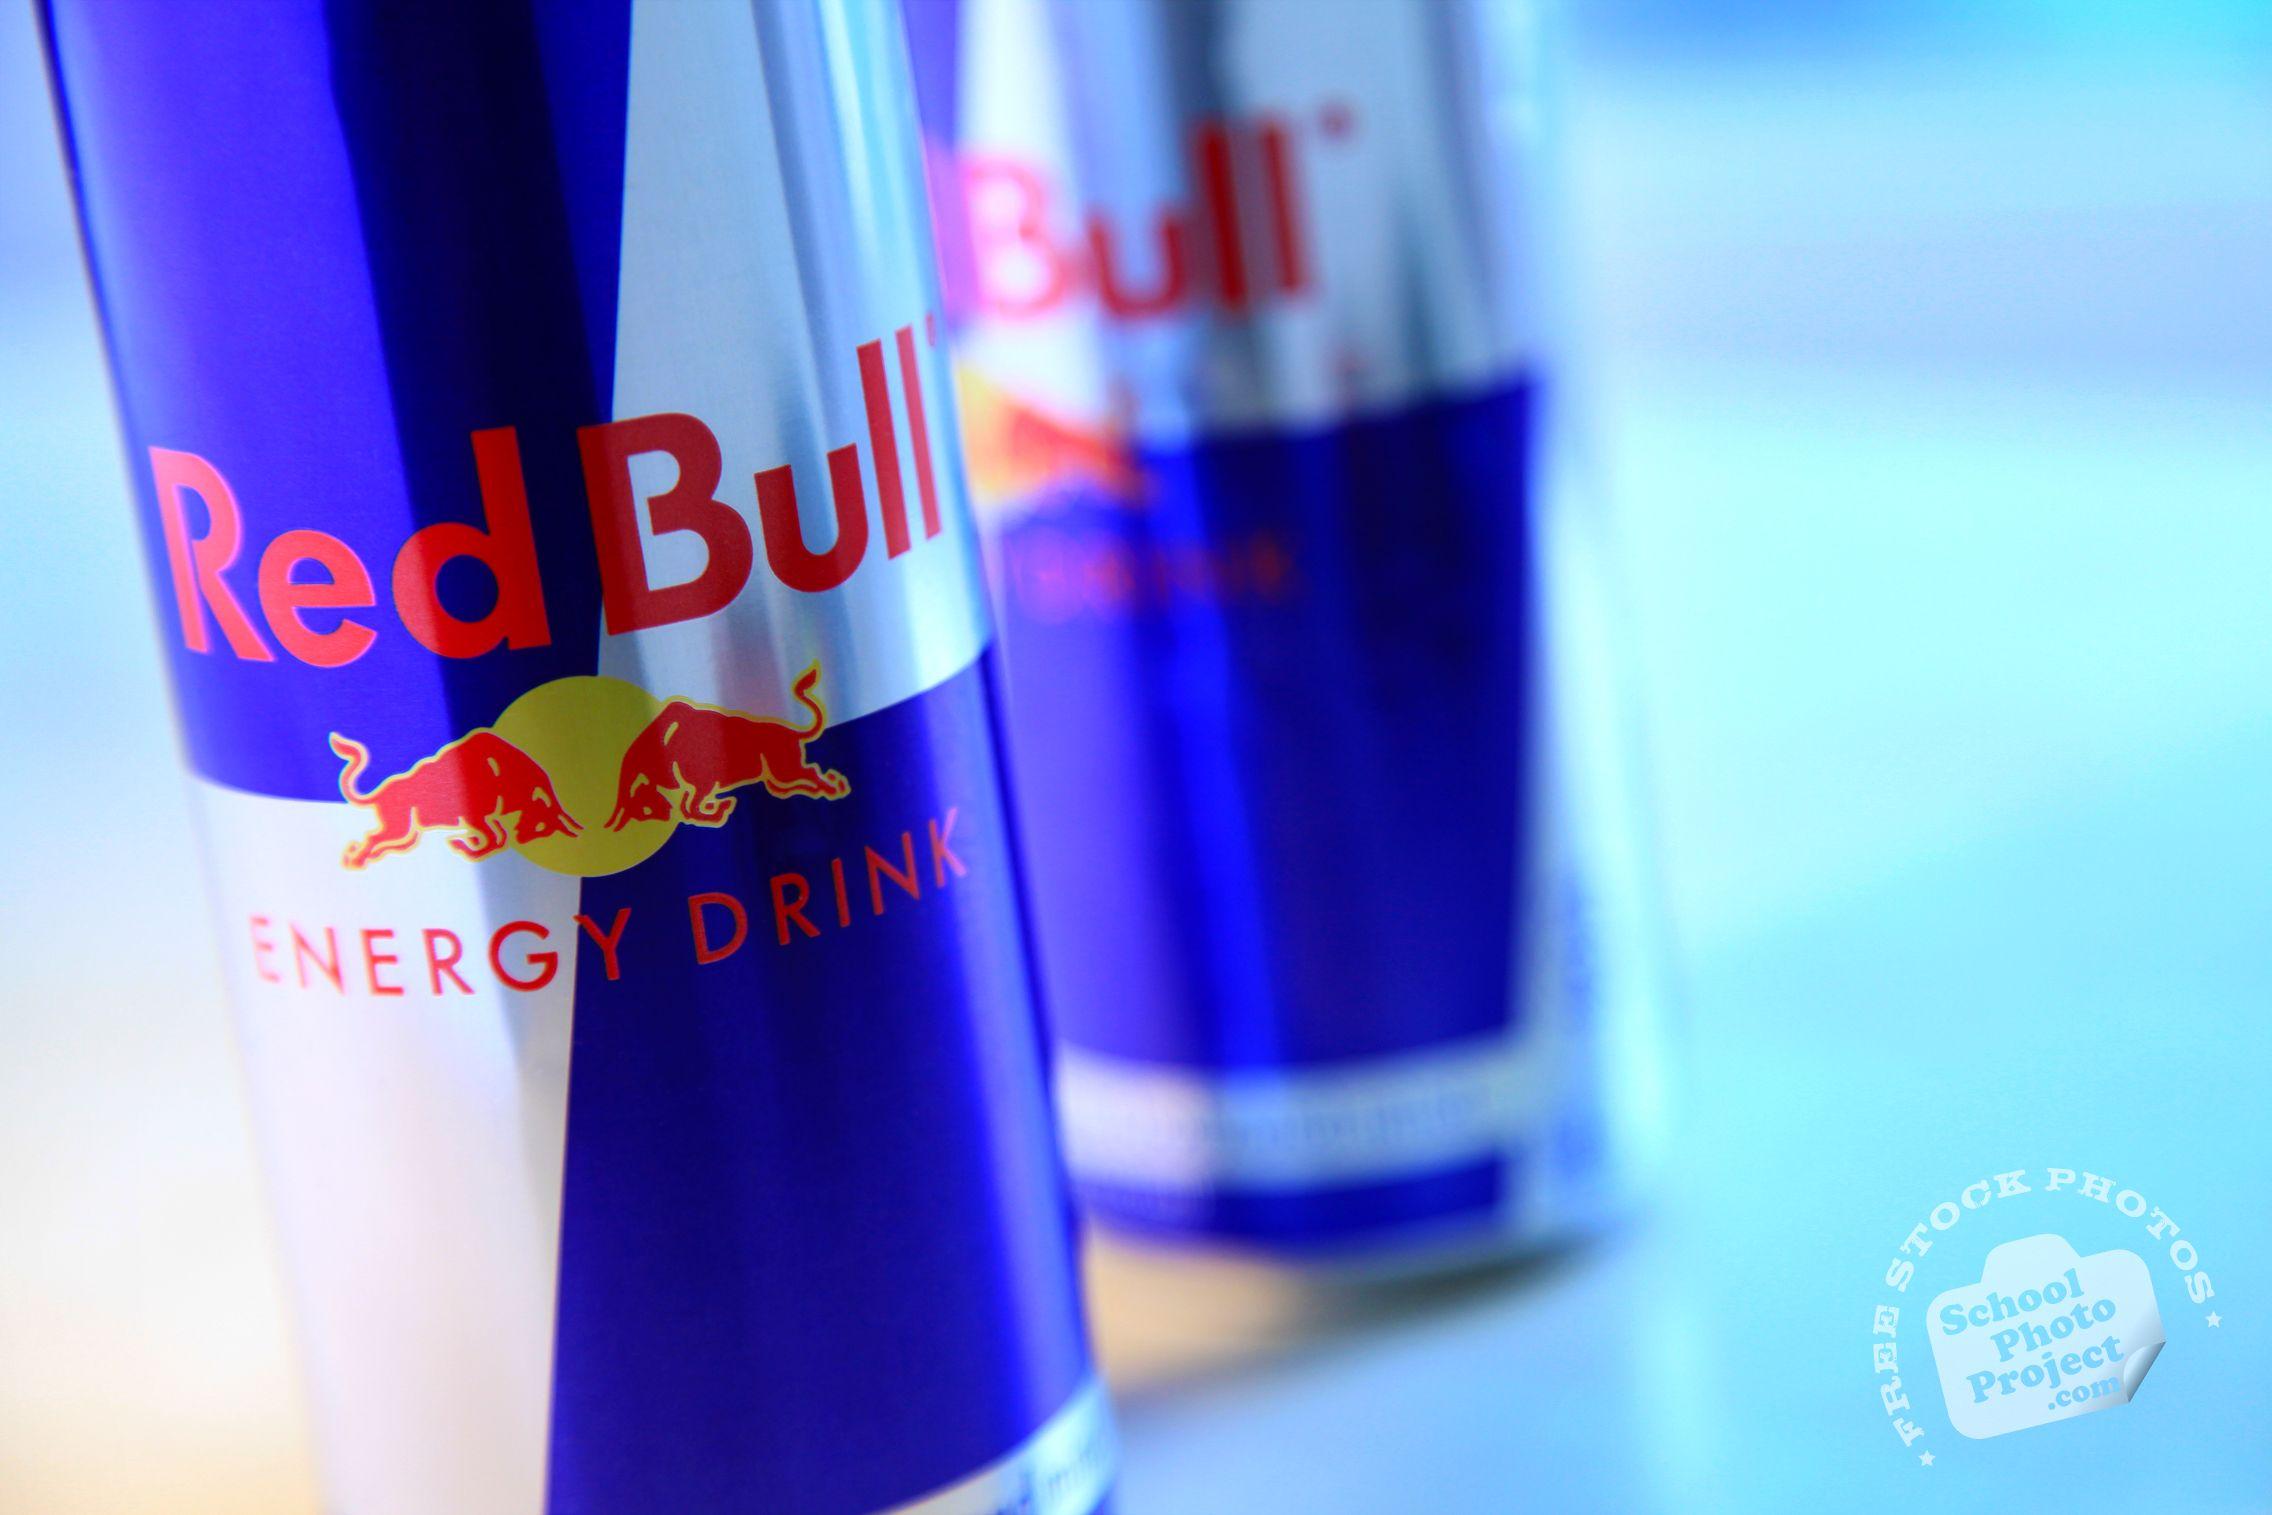 Famous Bull Logo - Red Bull, FREE Stock Photo, Image, Picture: Red Bull Logo, Royalty ...